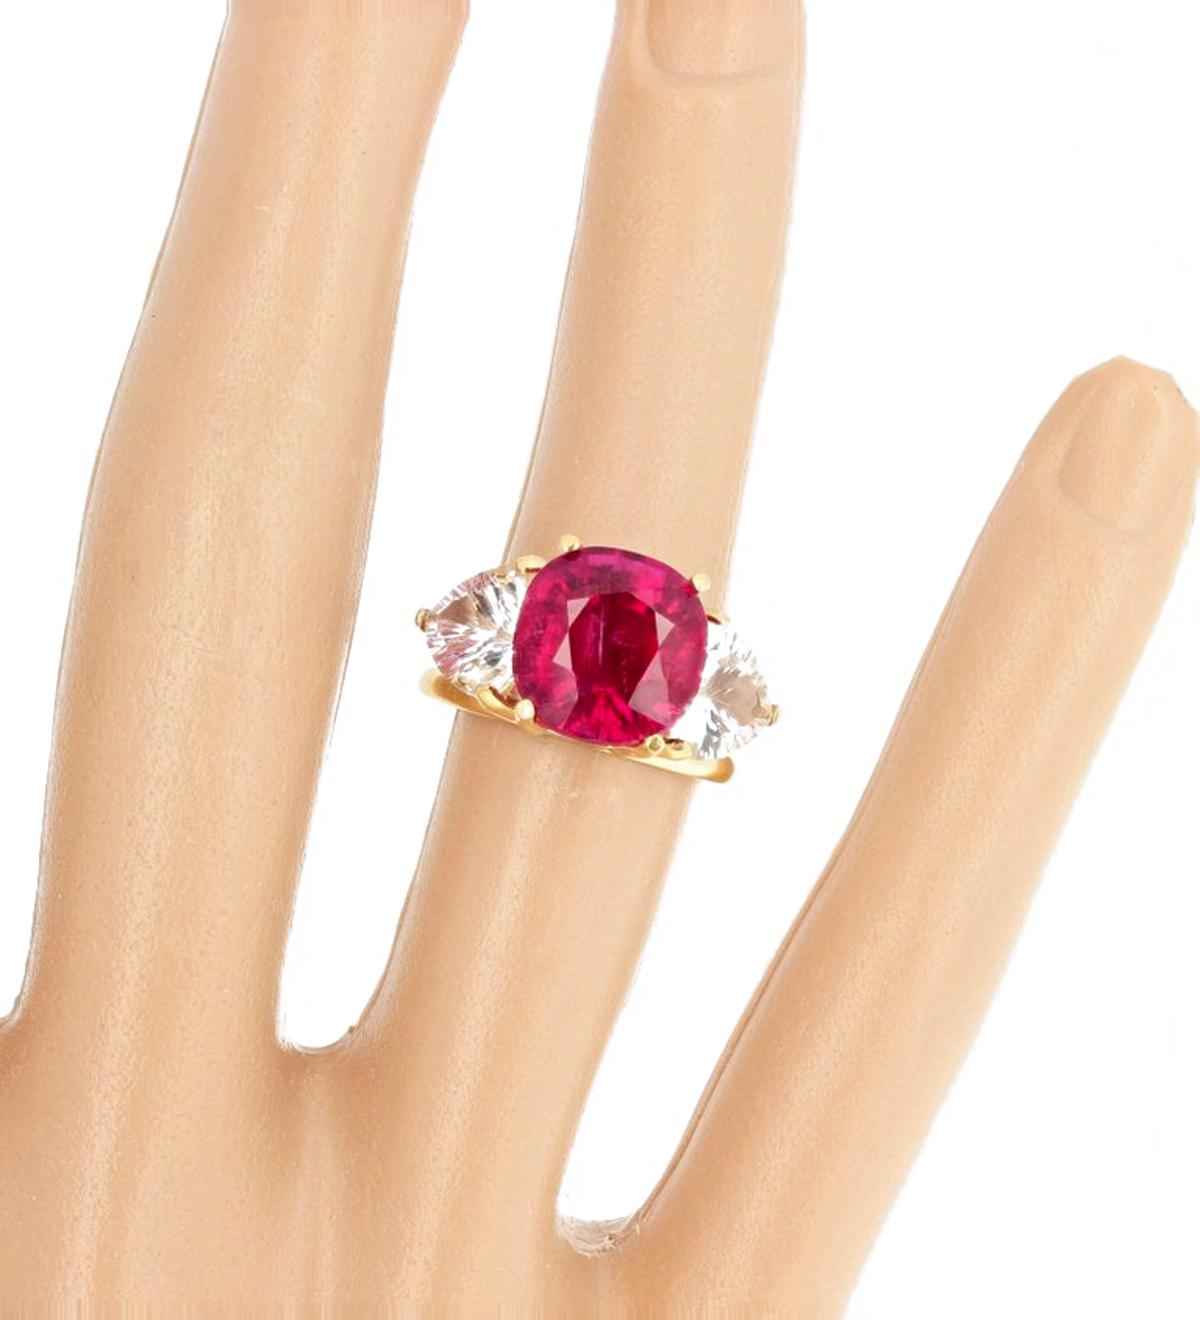 Brilliant 7.2 carat red cushion cut Tourmaline enhanced with trillion cut silvery Topaz set in a unique handmade 18 Kt yellow gold ring size 7 (sizable). PLEASE NOTE:  there is an eye visible inclusion that flashes in the Tourmaline if you turn it